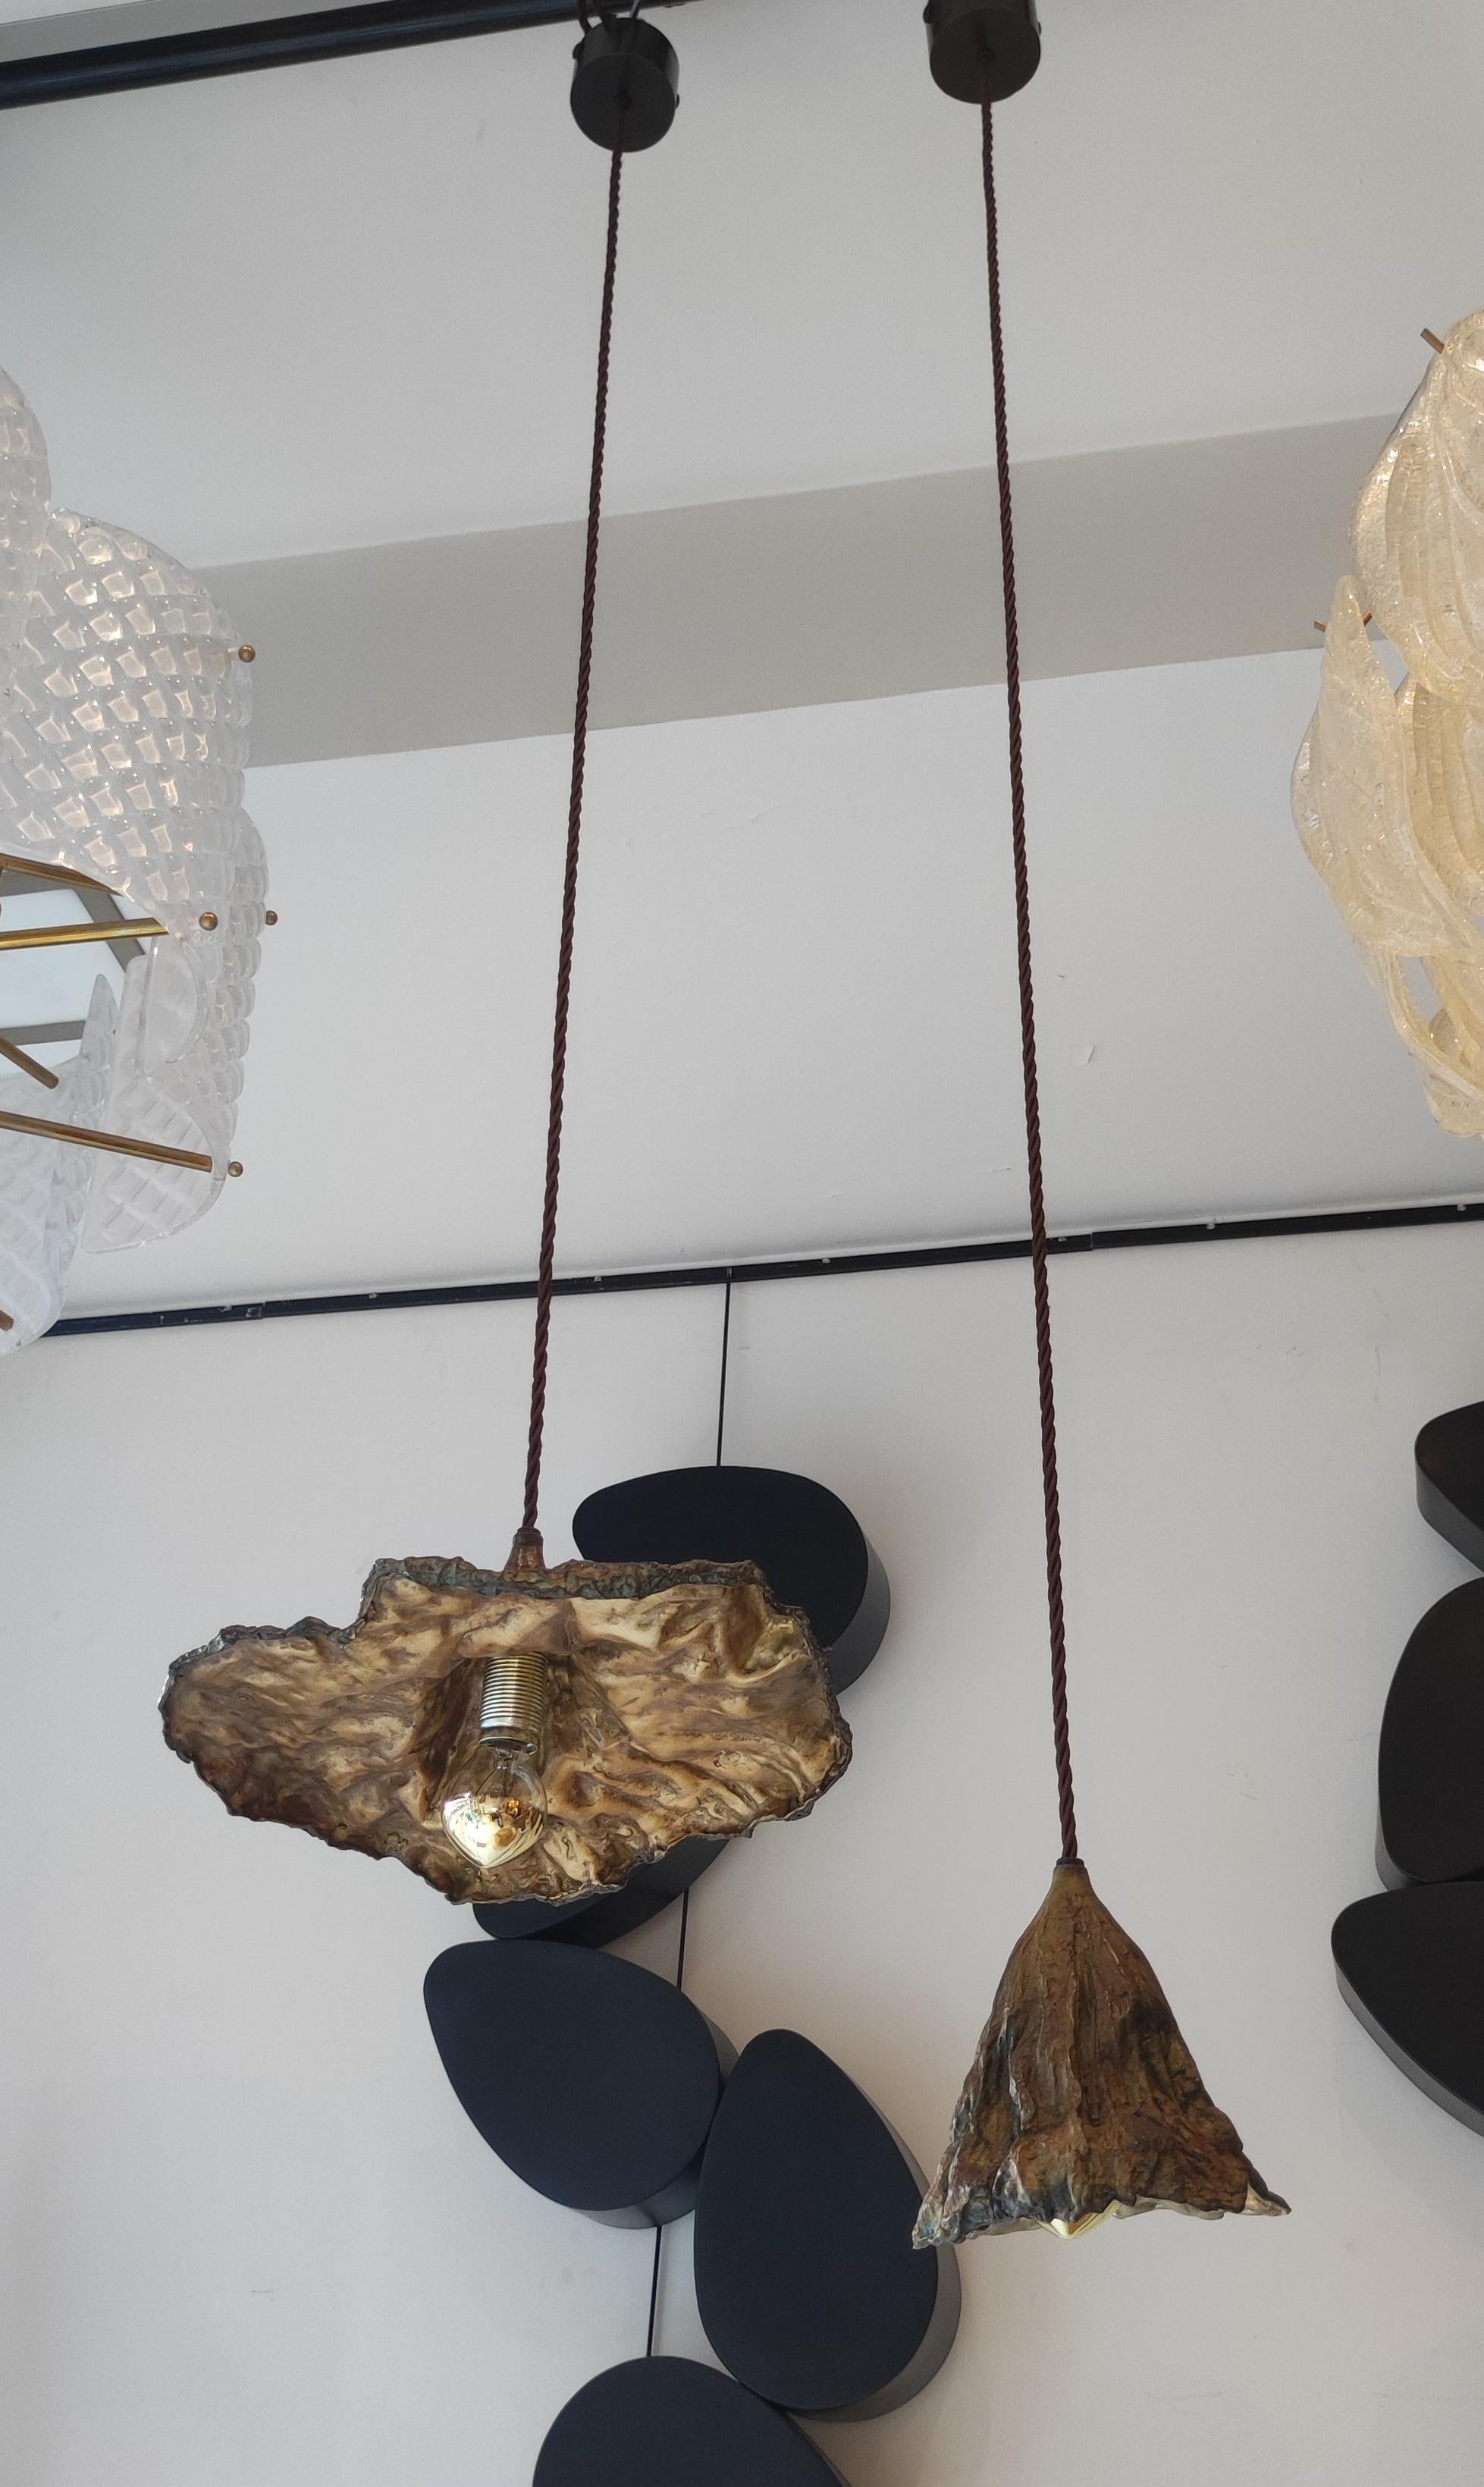 Two different bronze light suspensions in the shape of a faded leaf, provided with a golden bulb. Golden interior.

Dimension: H 16 x 20 x 12 cm and H 10 x 30 x 26 ) without the cord.
Max H: 160 cm (can be shortened).

3 pieces of each model